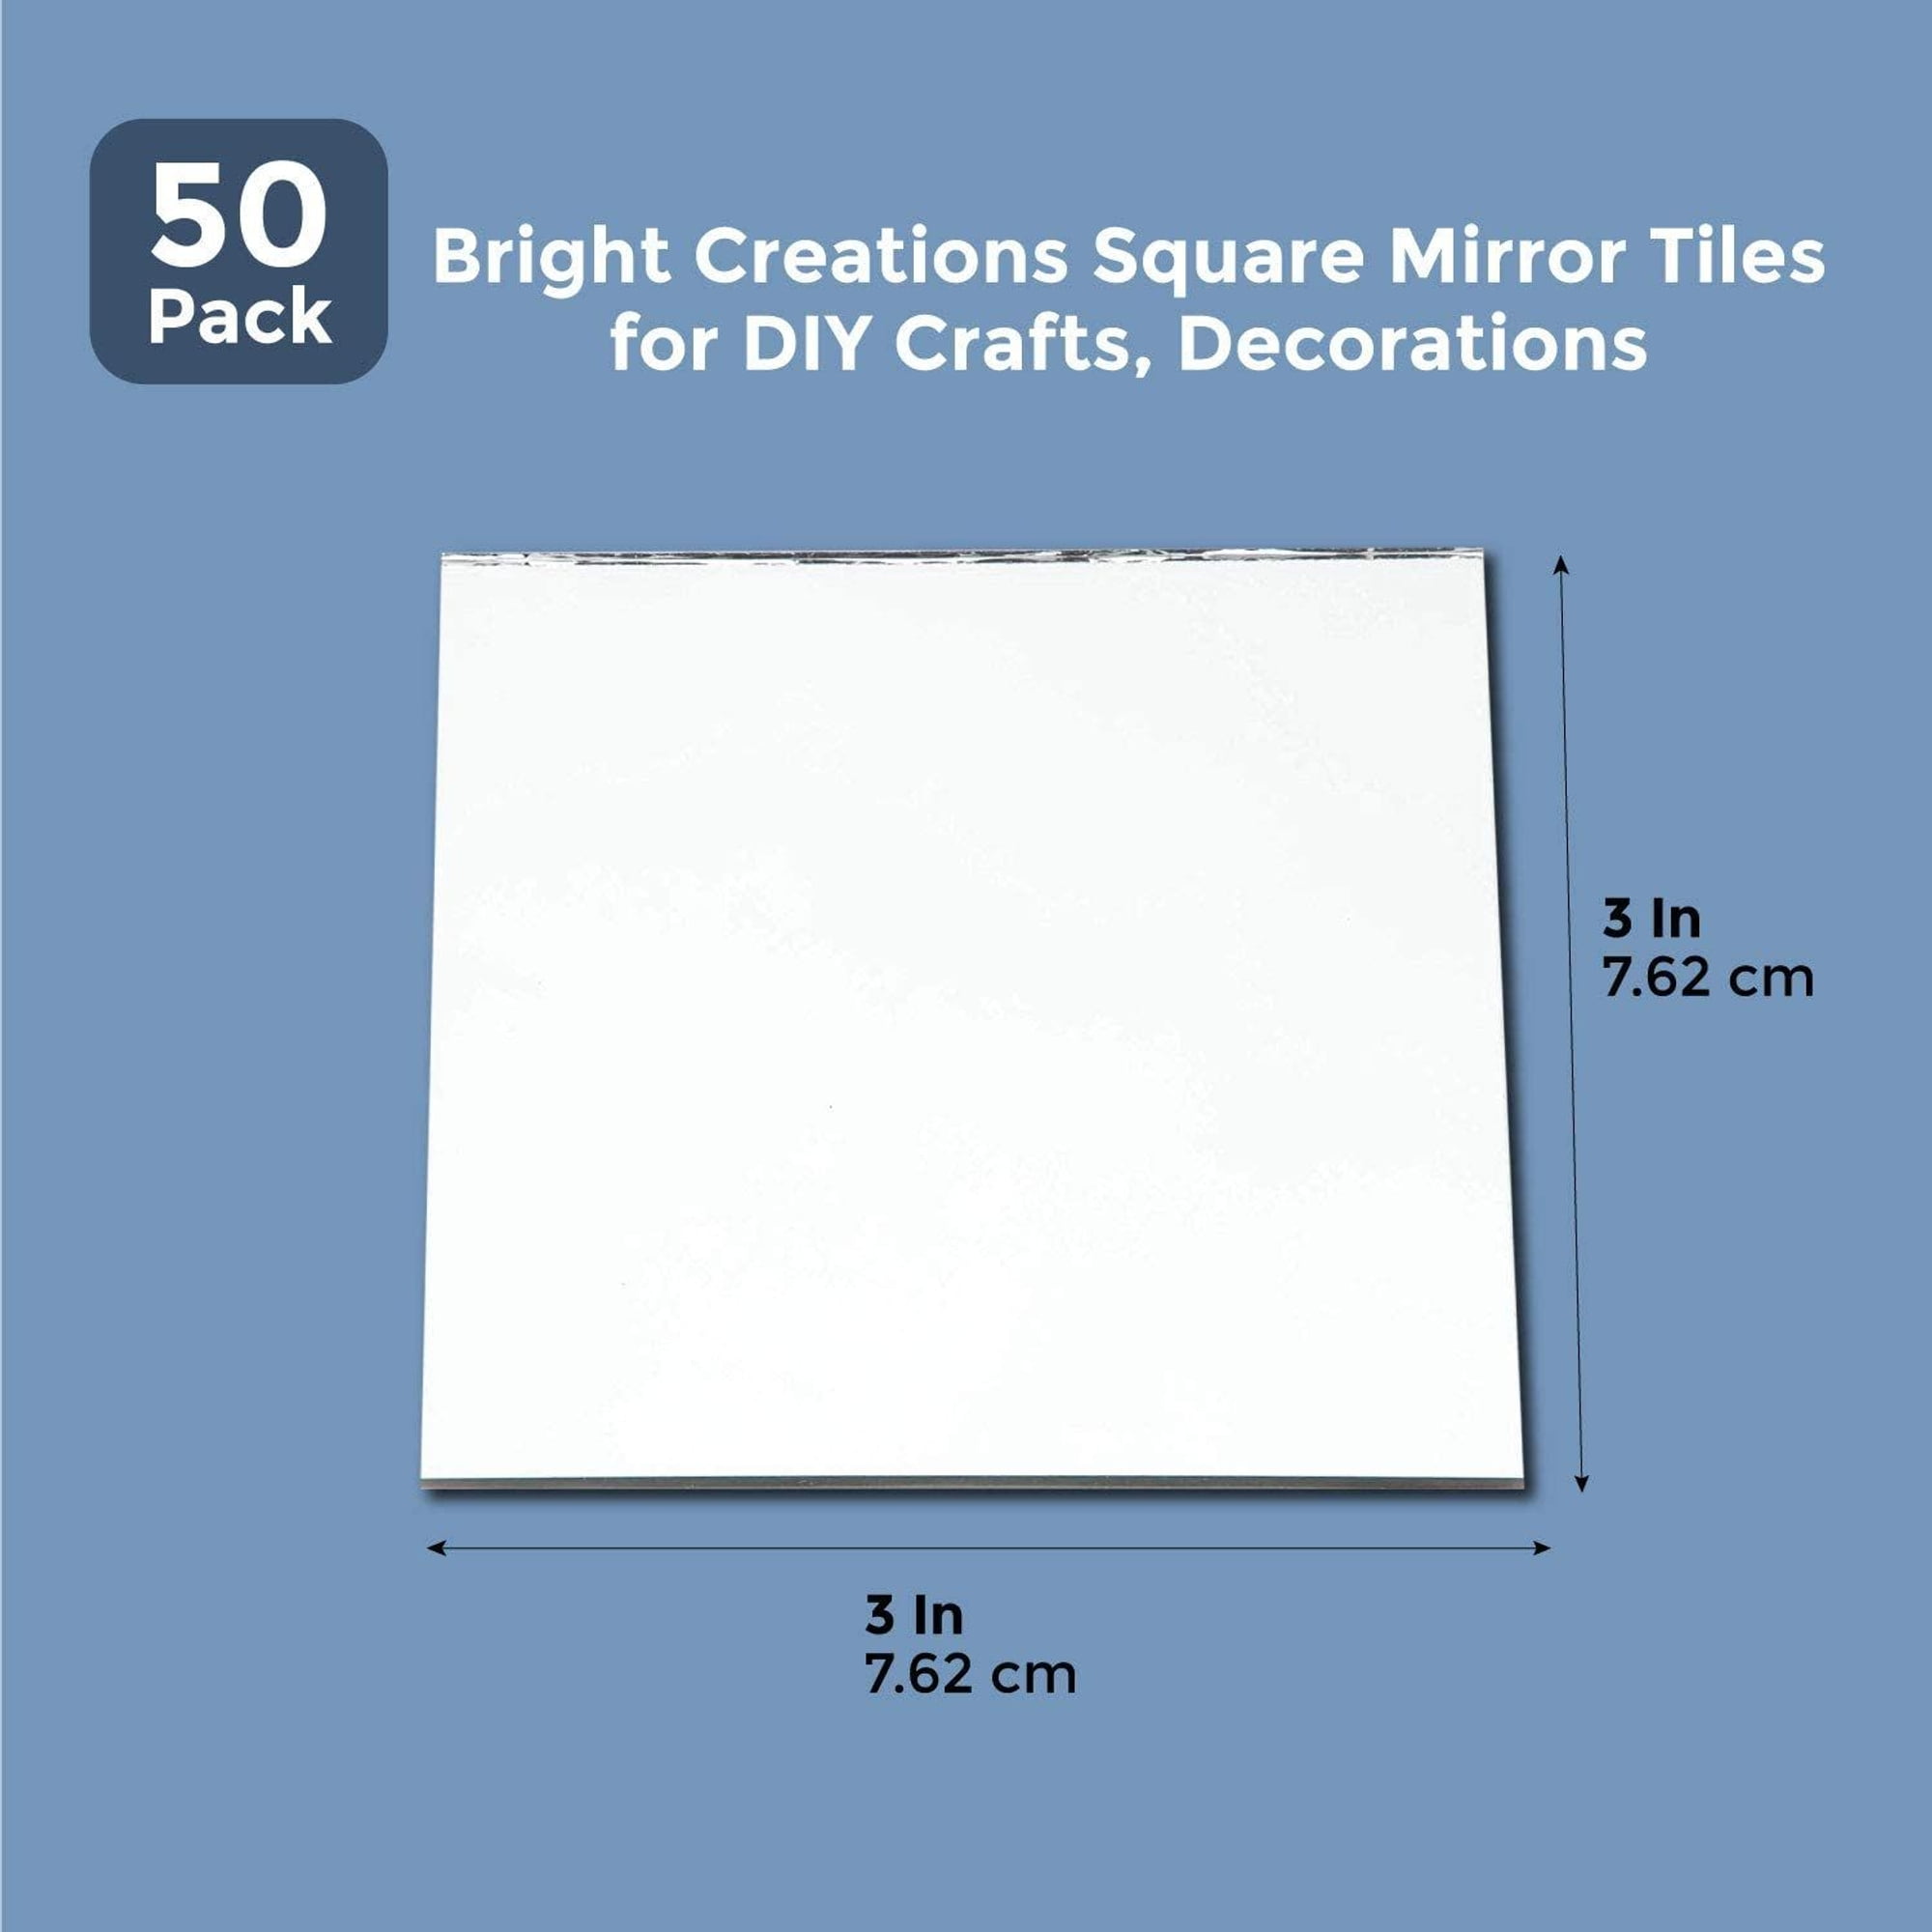 Suwimut 50 Pack Square Glass Mirror Tiles, 4x4 Inch Small Square Decorative  Glass Mirrors for Table Centerpieces, Crafts, Wall, Mosaics, DIY Home